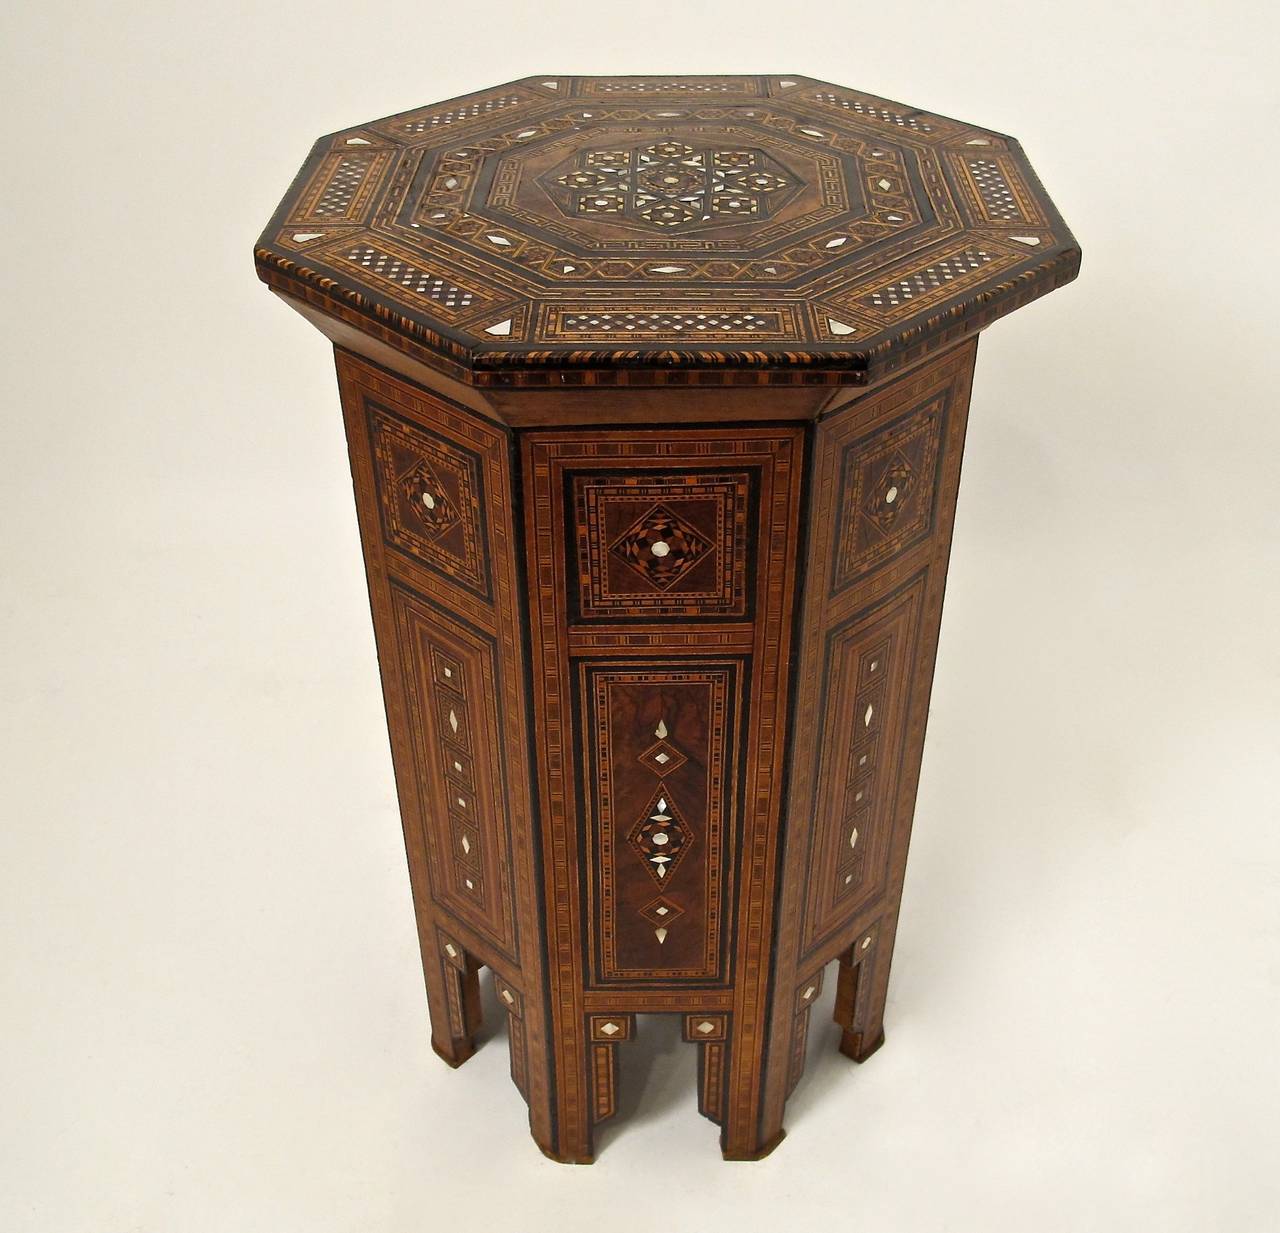 Octagonal shape side table with elaborate inlaid woods, mother-of-pearl and ebonized detail, Syria, late-early 20th century.